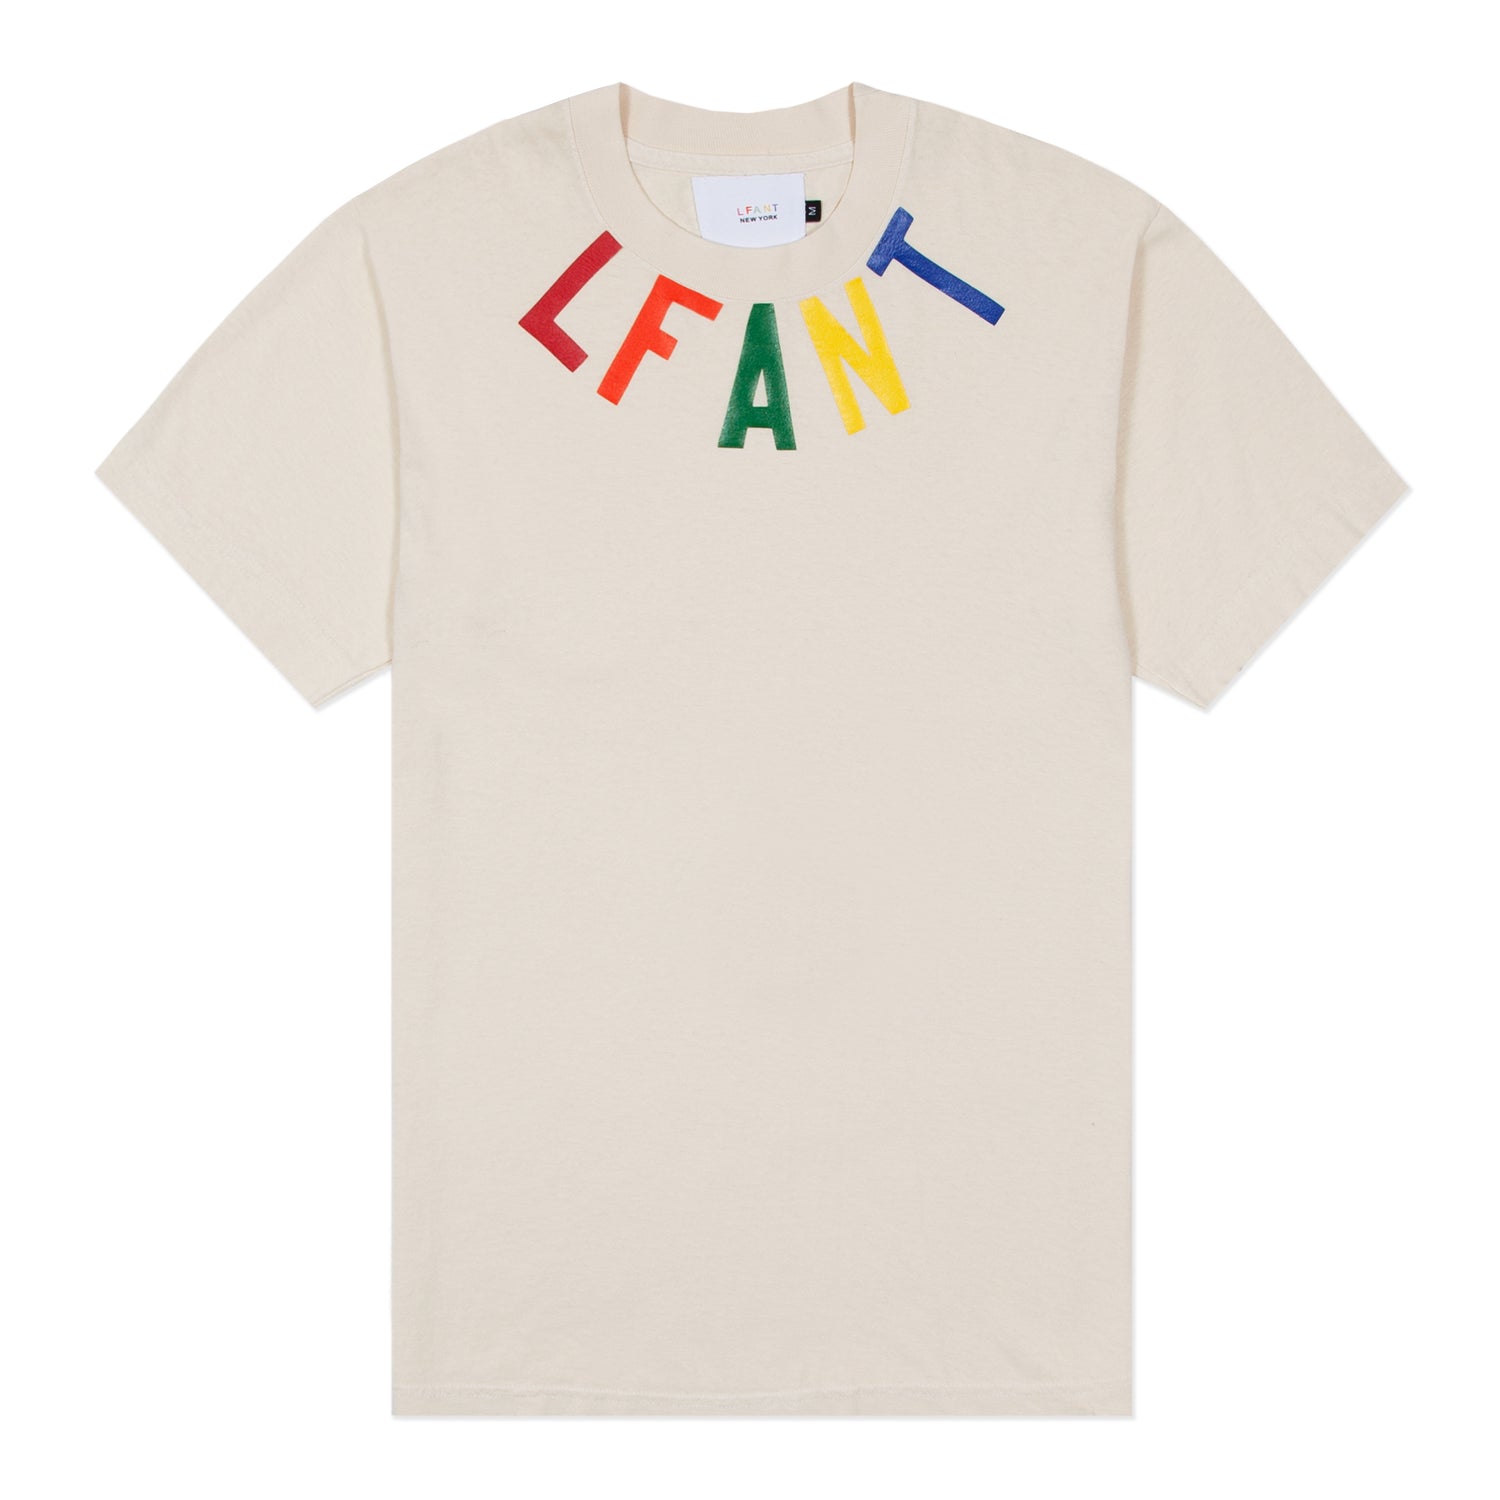 Grey t-shirt with multicolored "LFANT" printed around the collar.